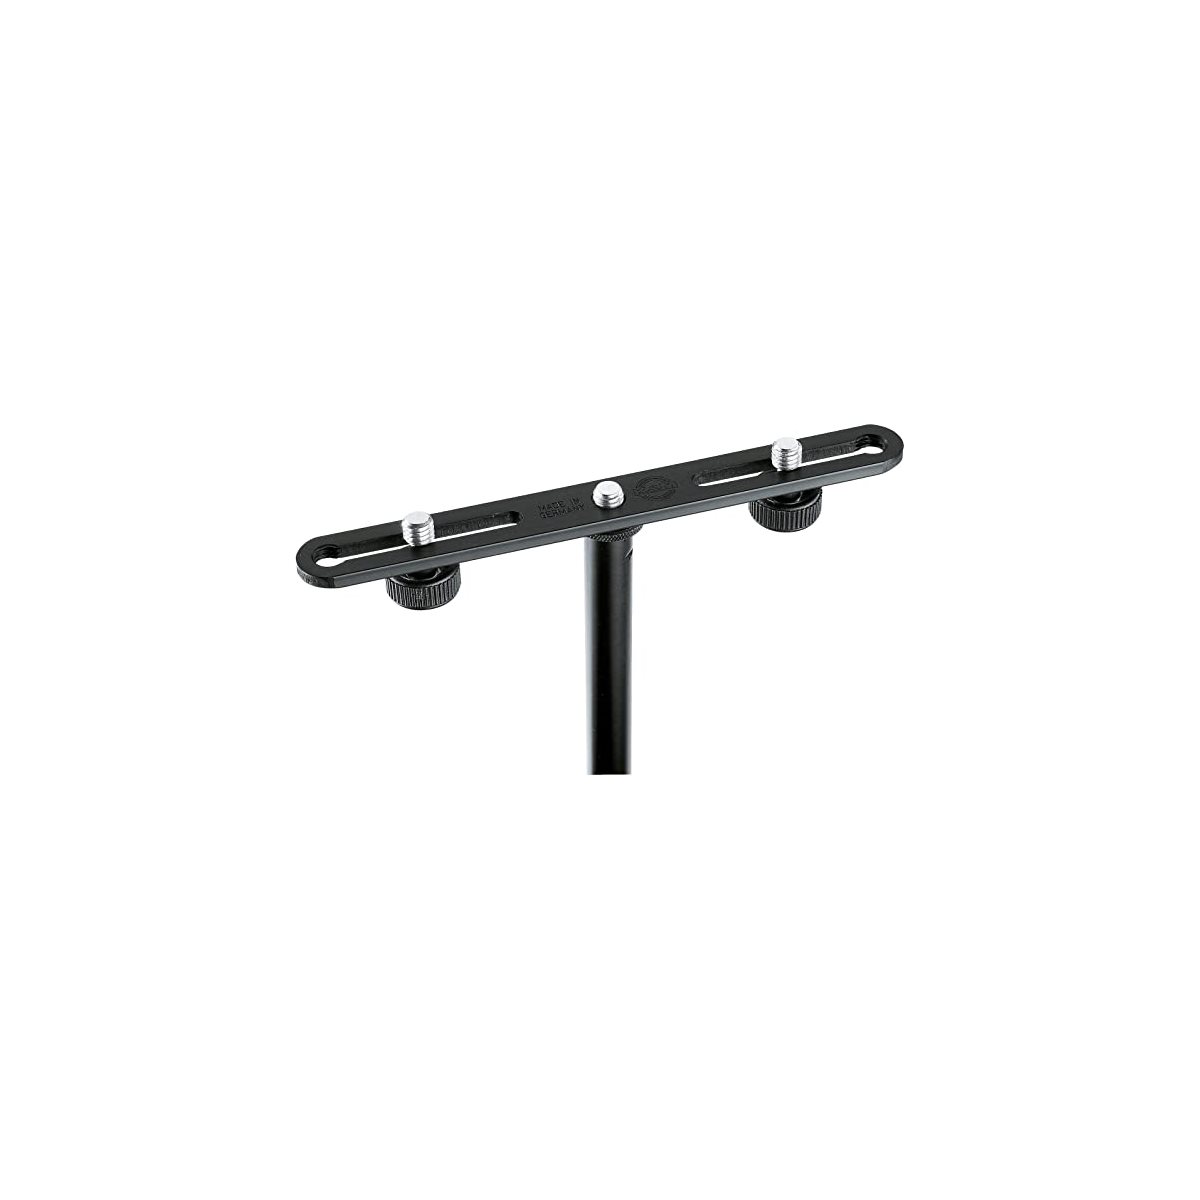 K&M - 23550-BLACK - Microphone bar for holding 2 microphones / boom arms